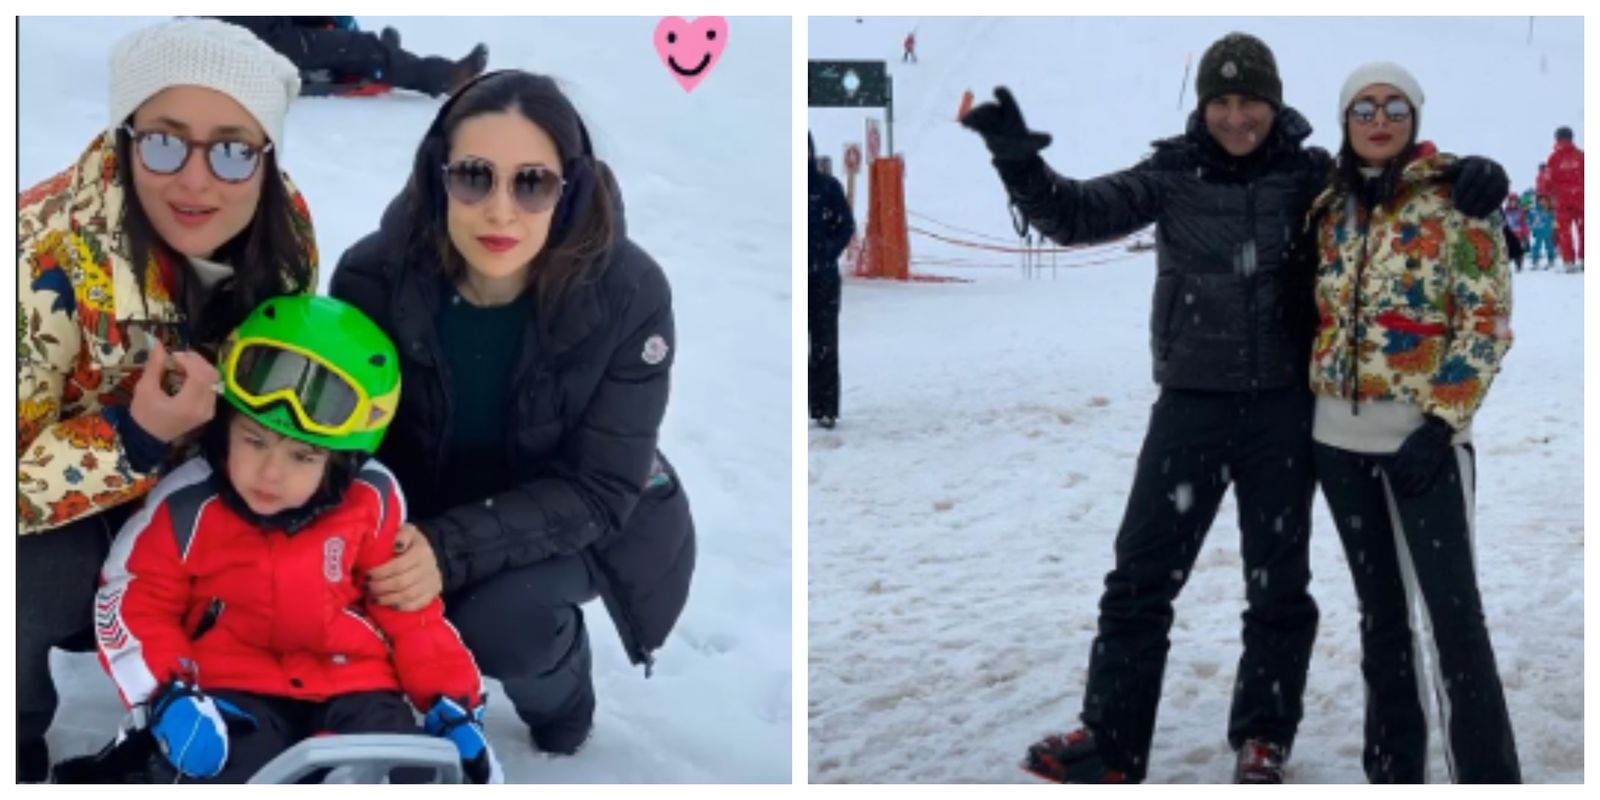 Taimur Ali Khan Looks Cute As A Button As He Vacays With Parents Kareena Kapoor And Saif Ali Khan In Switzerland